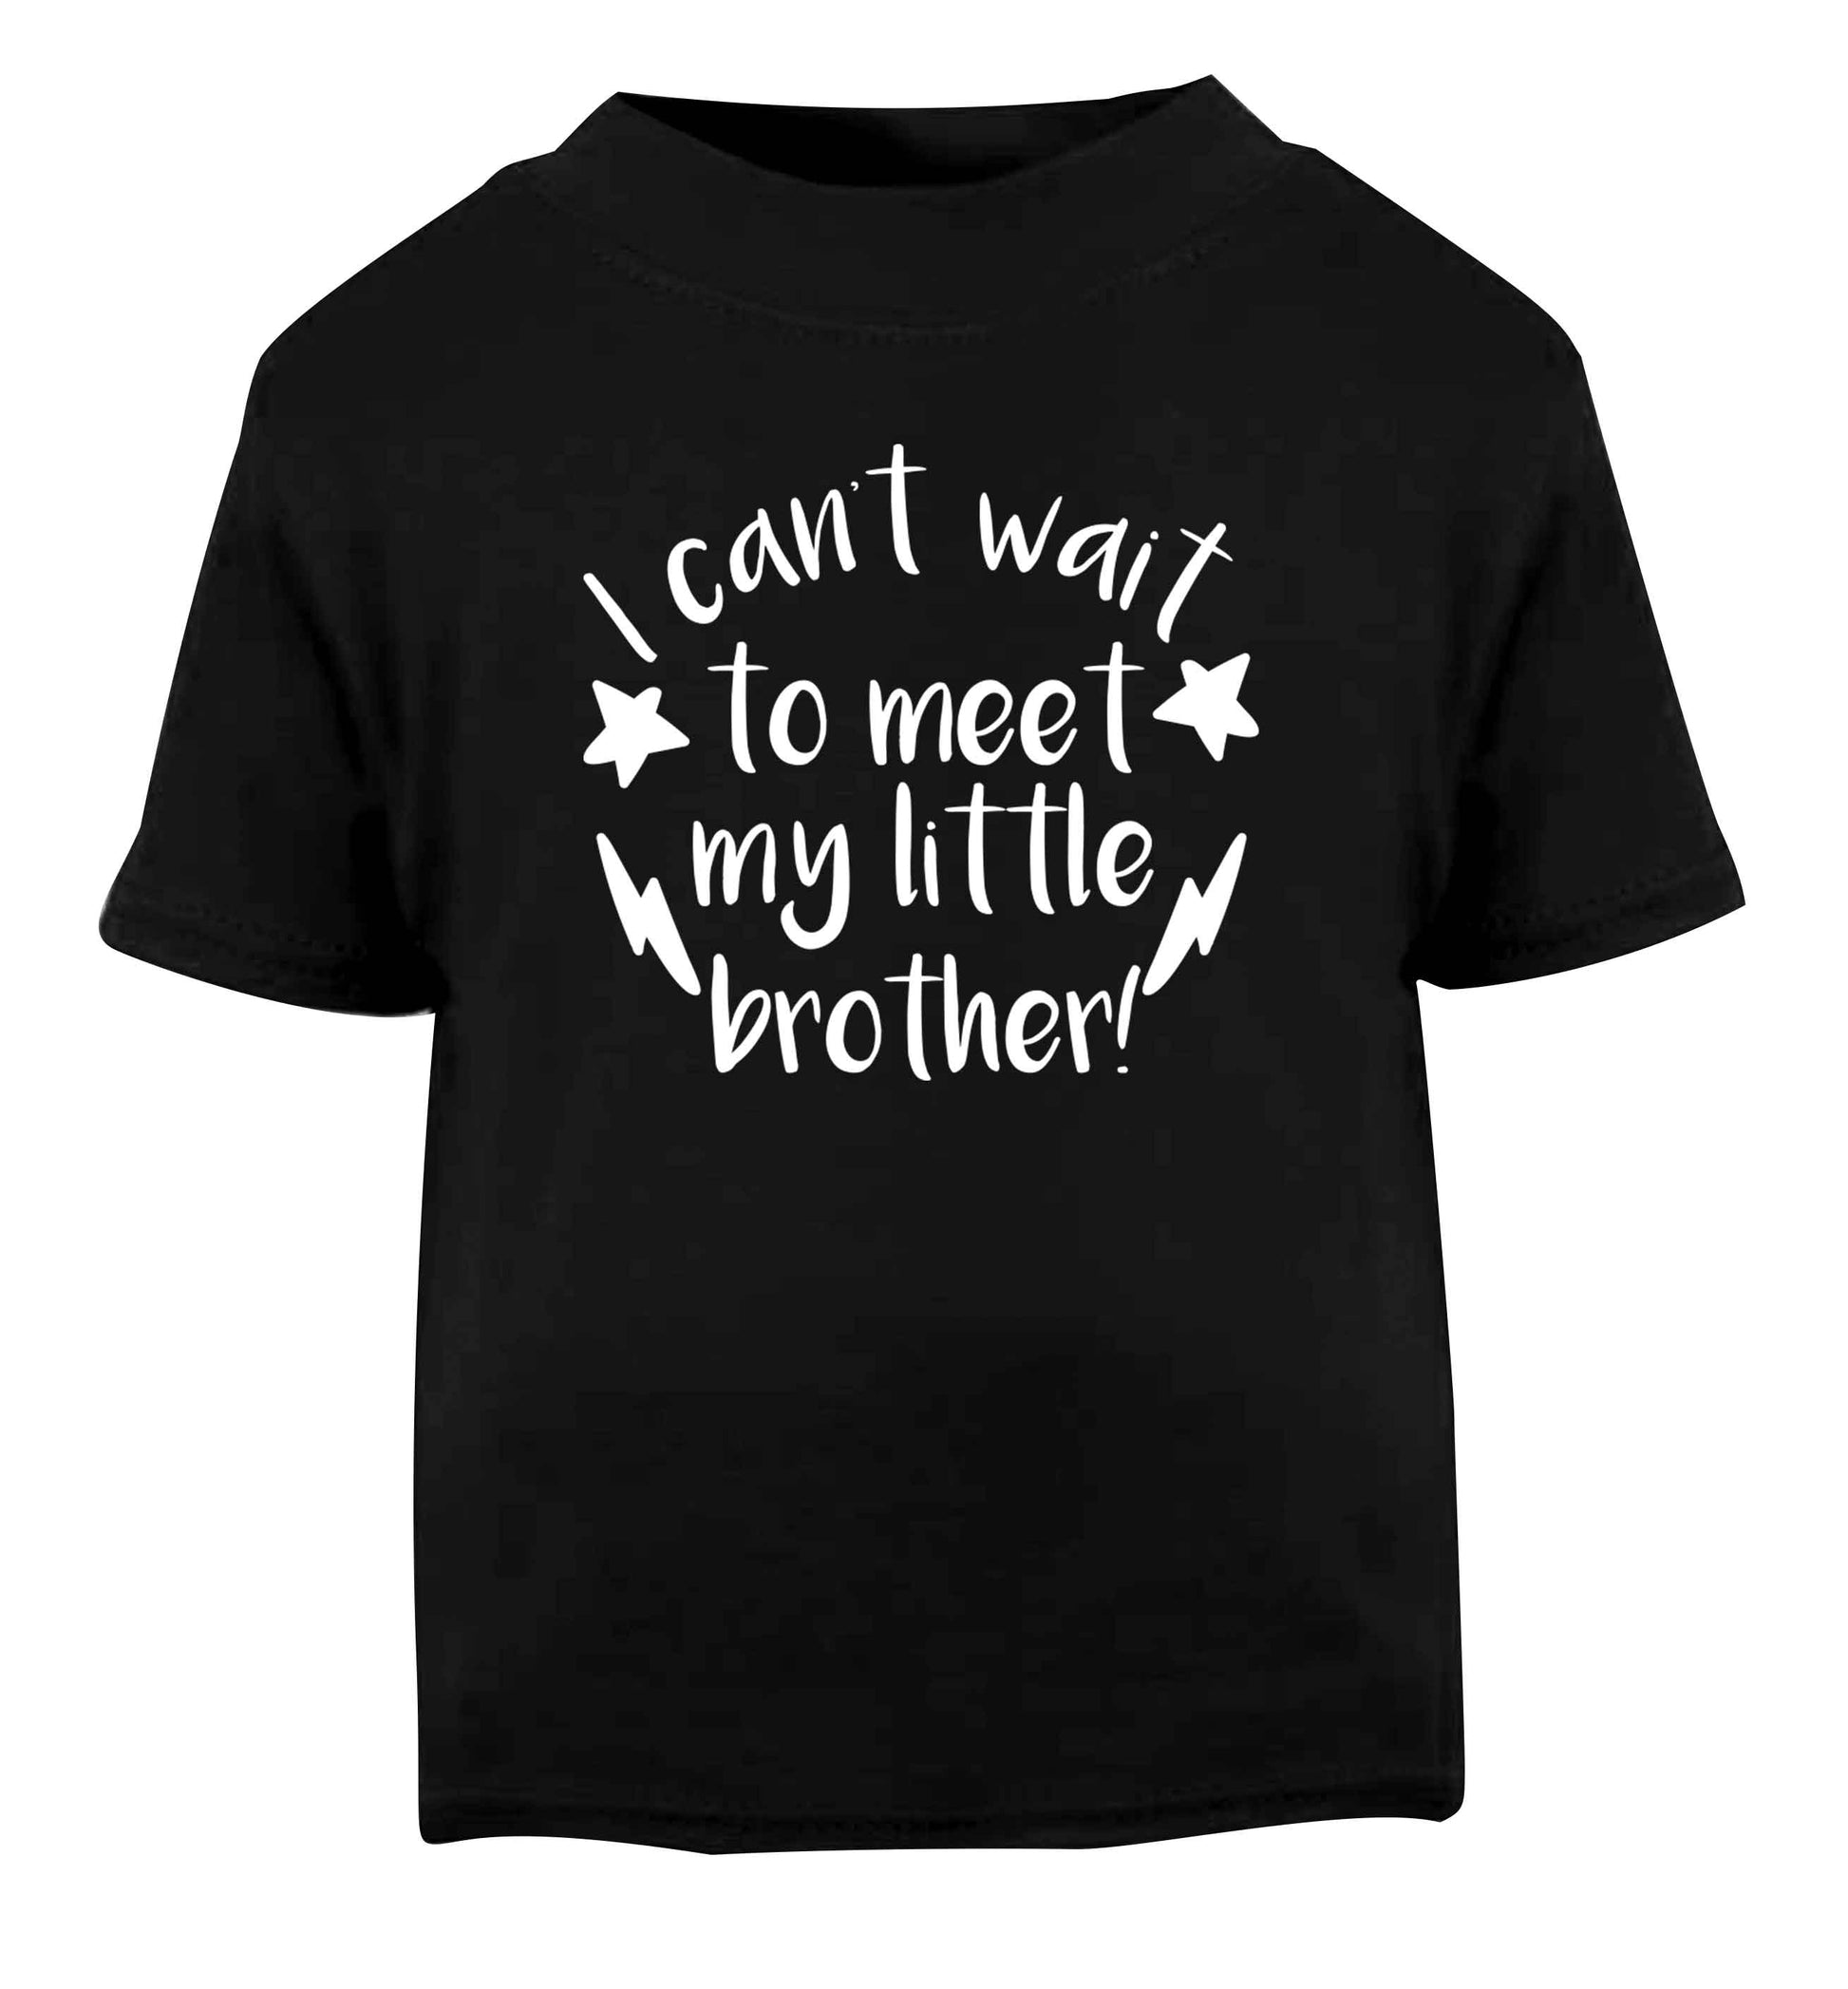 I can't wait to meet my sister! Black Baby Toddler Tshirt 2 years